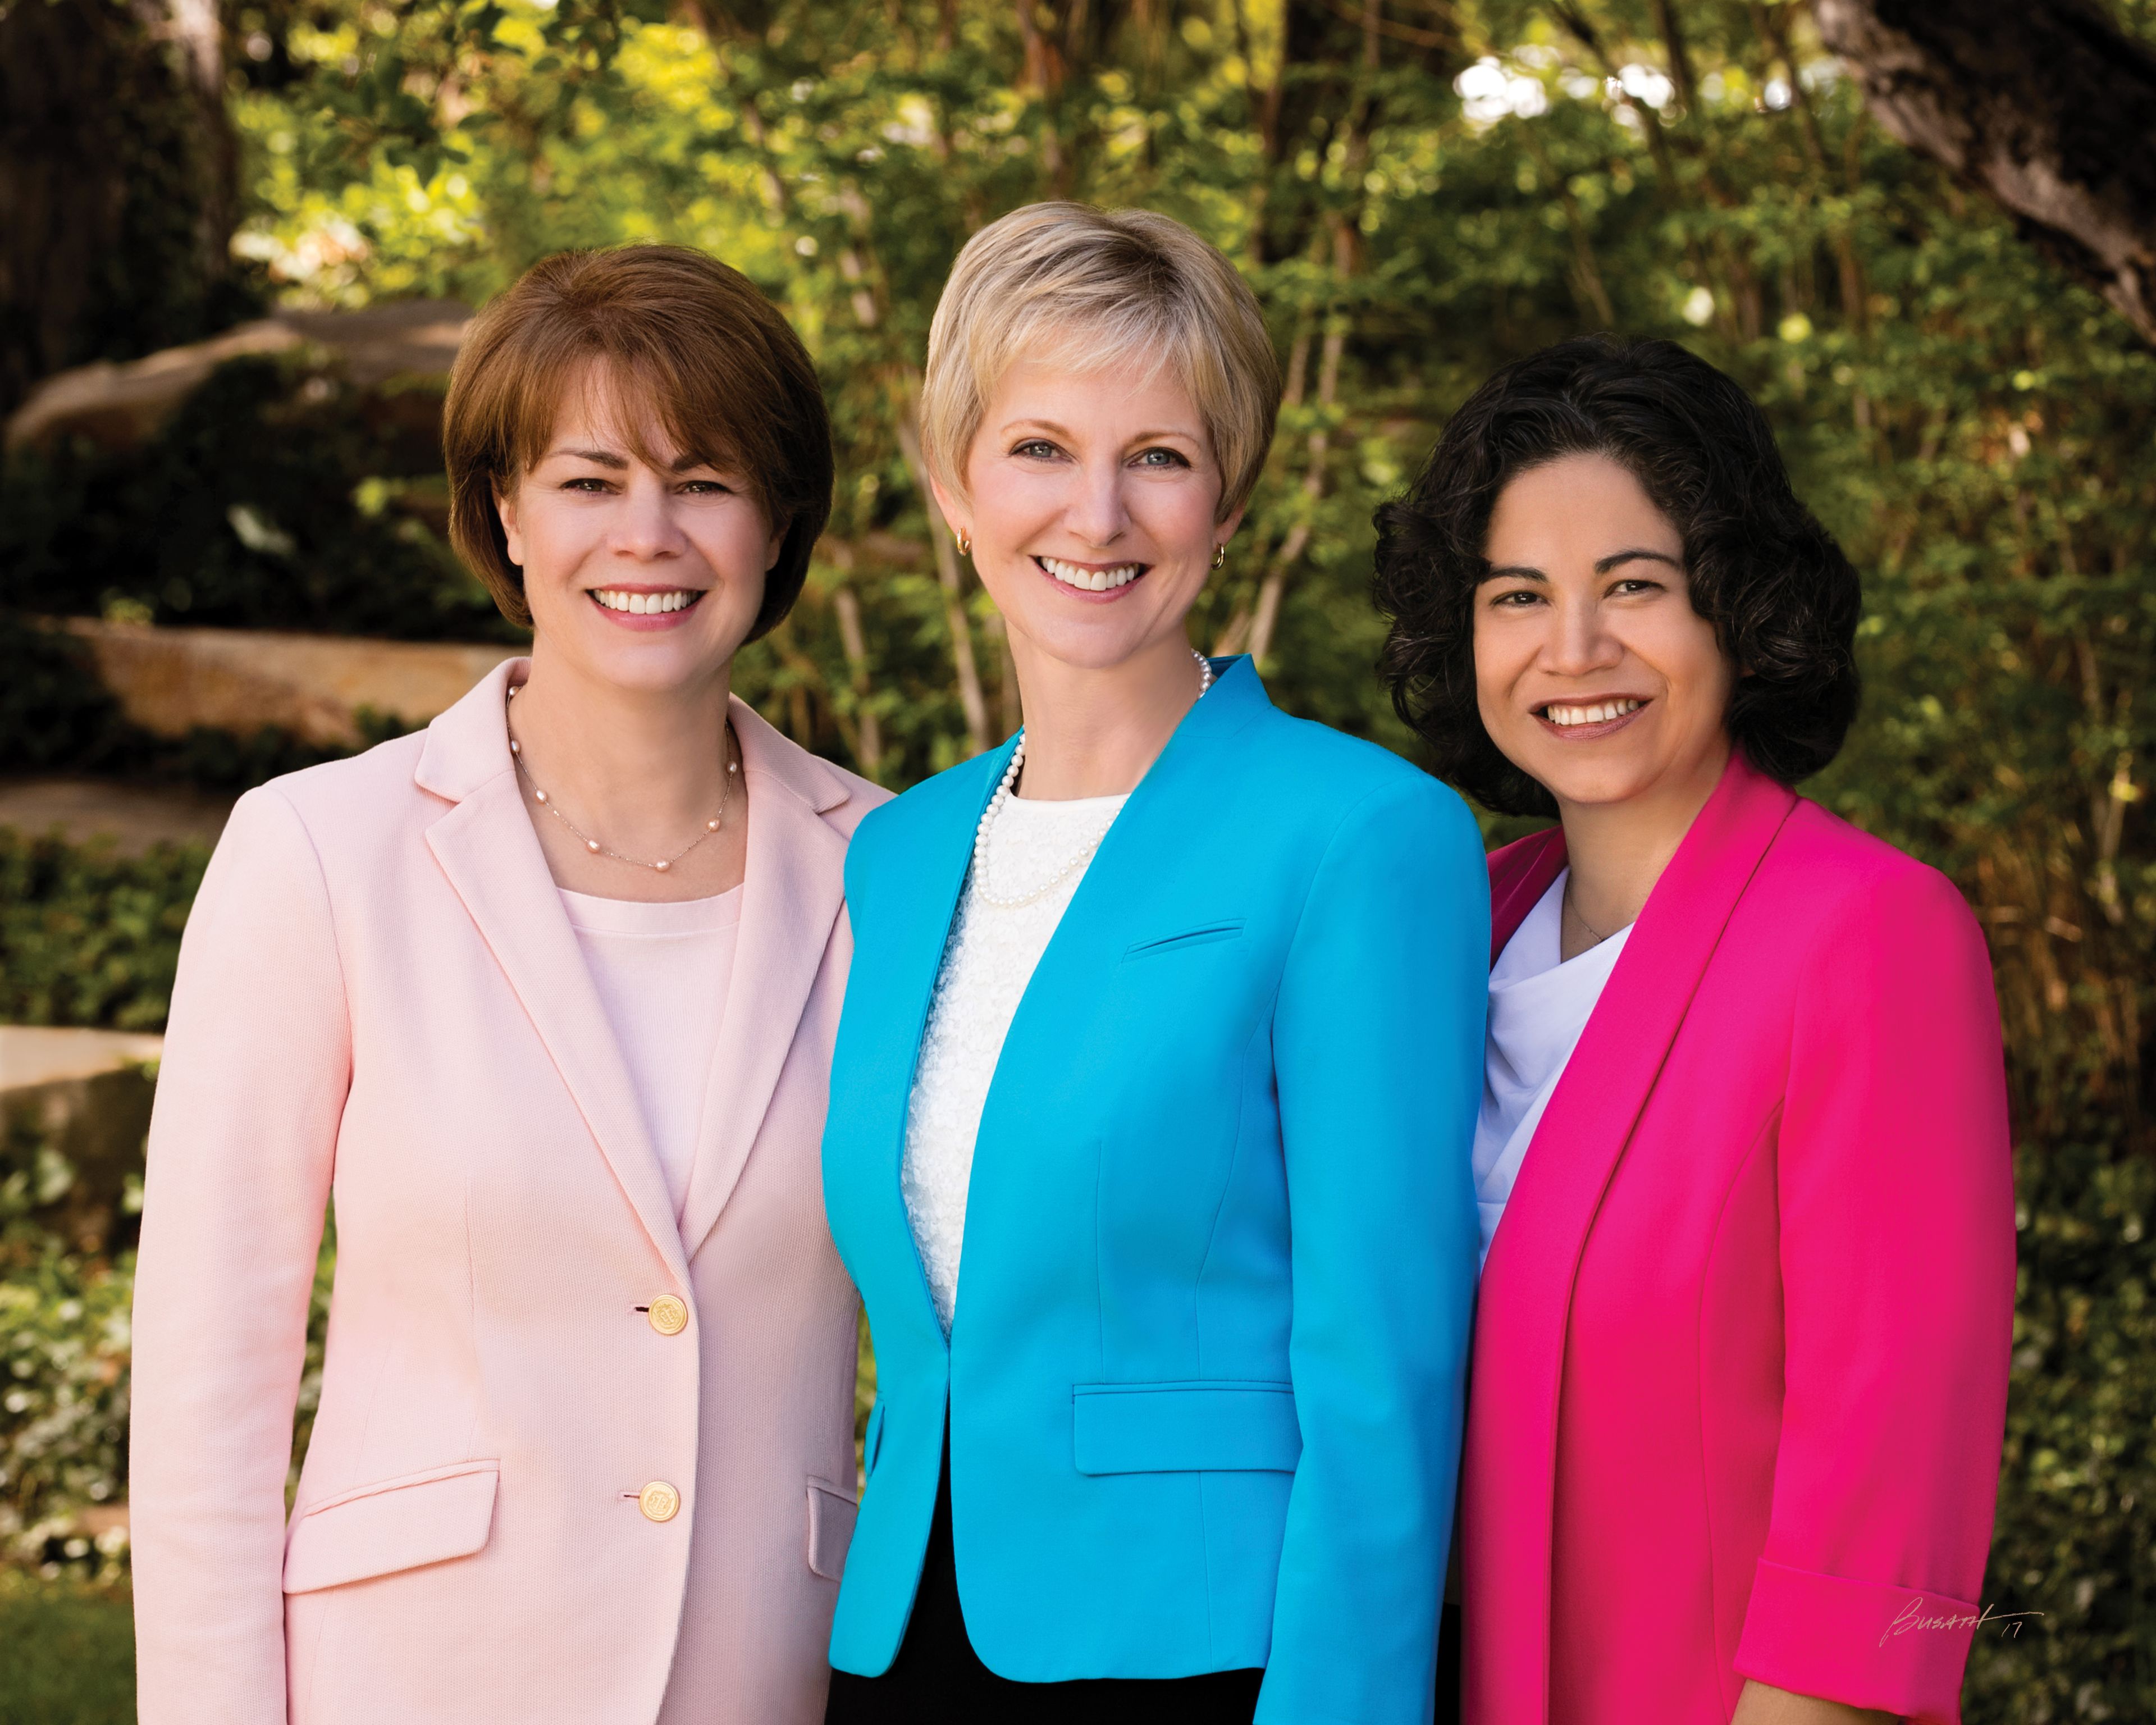 Official Portrait of the General Relief Society Presidency, left to right: Sharon Eubank (First Counselor), Jean B. Bingham (President) and Reyna Aburto (Second Counselor). Photographed in 2017.